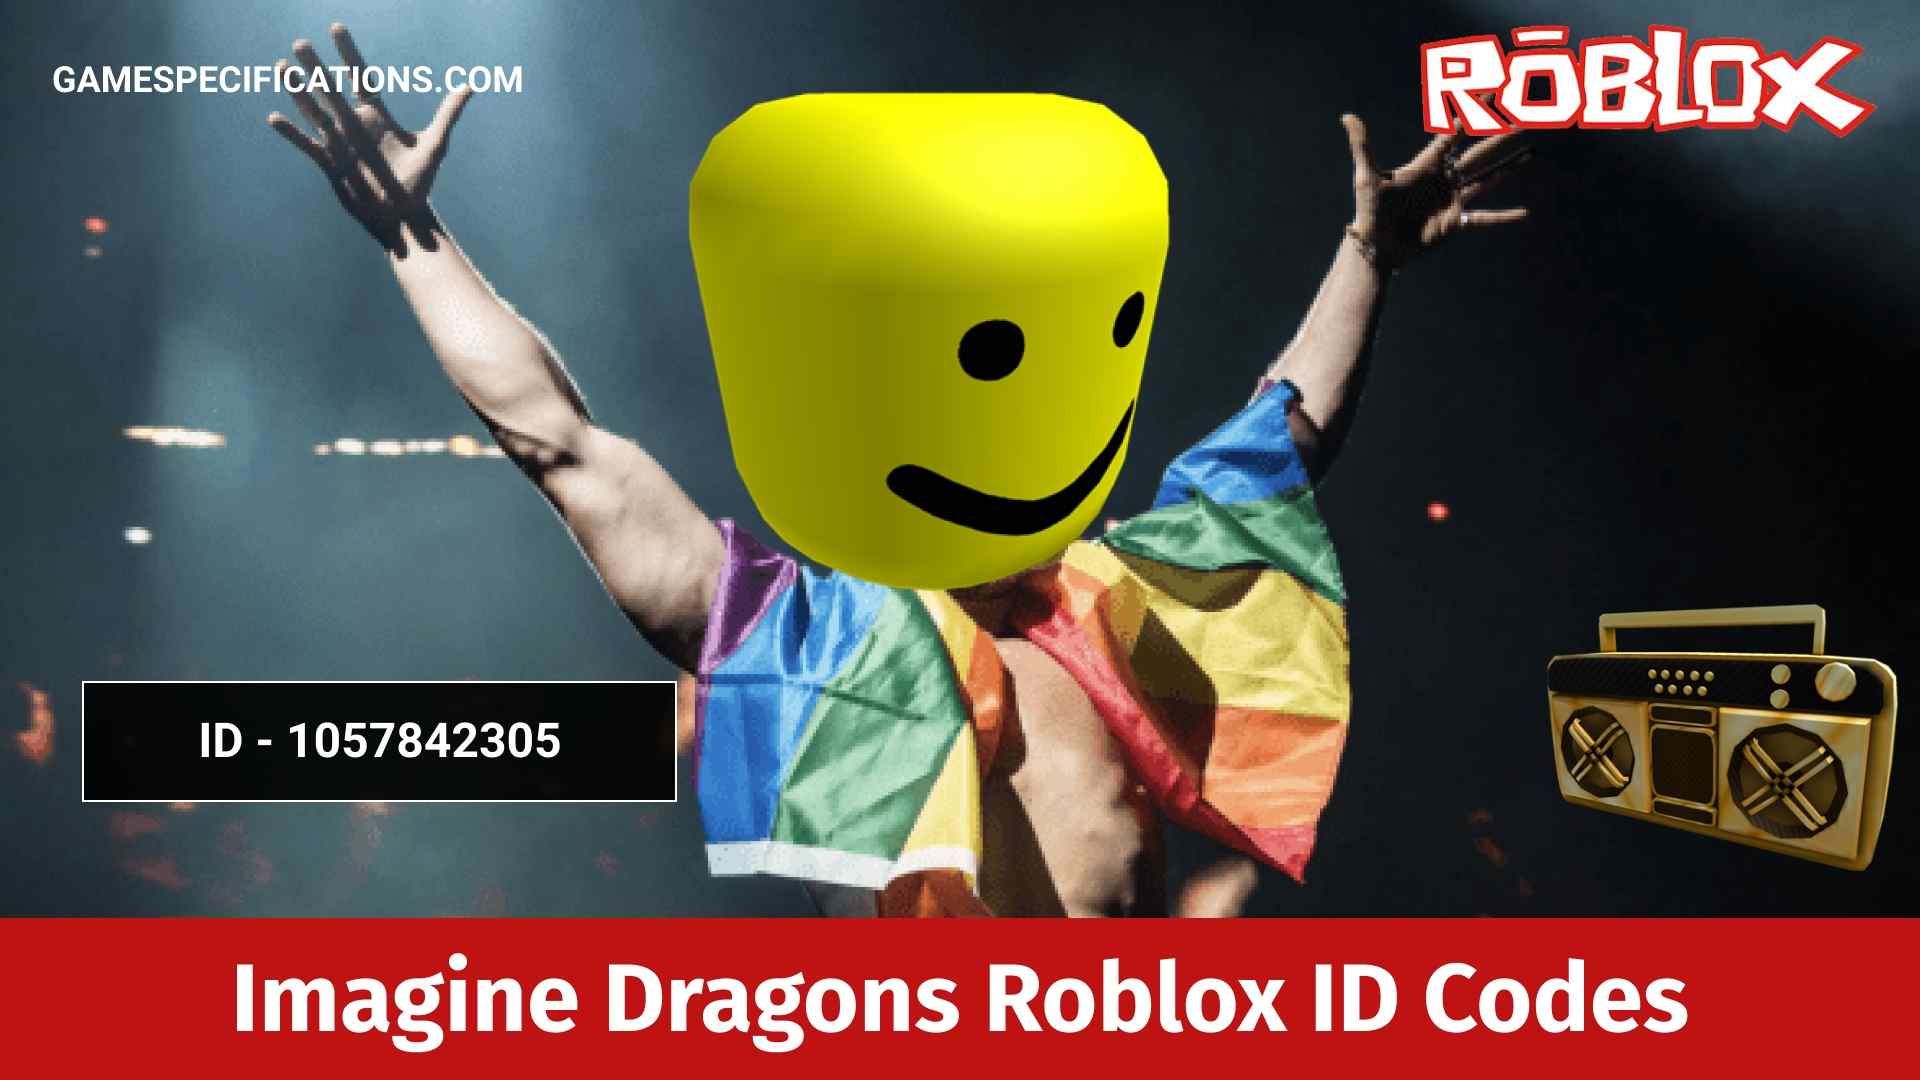 50 Imagine Dragons Roblox Id Codes 2021 Game Specifications - roblox warning image id